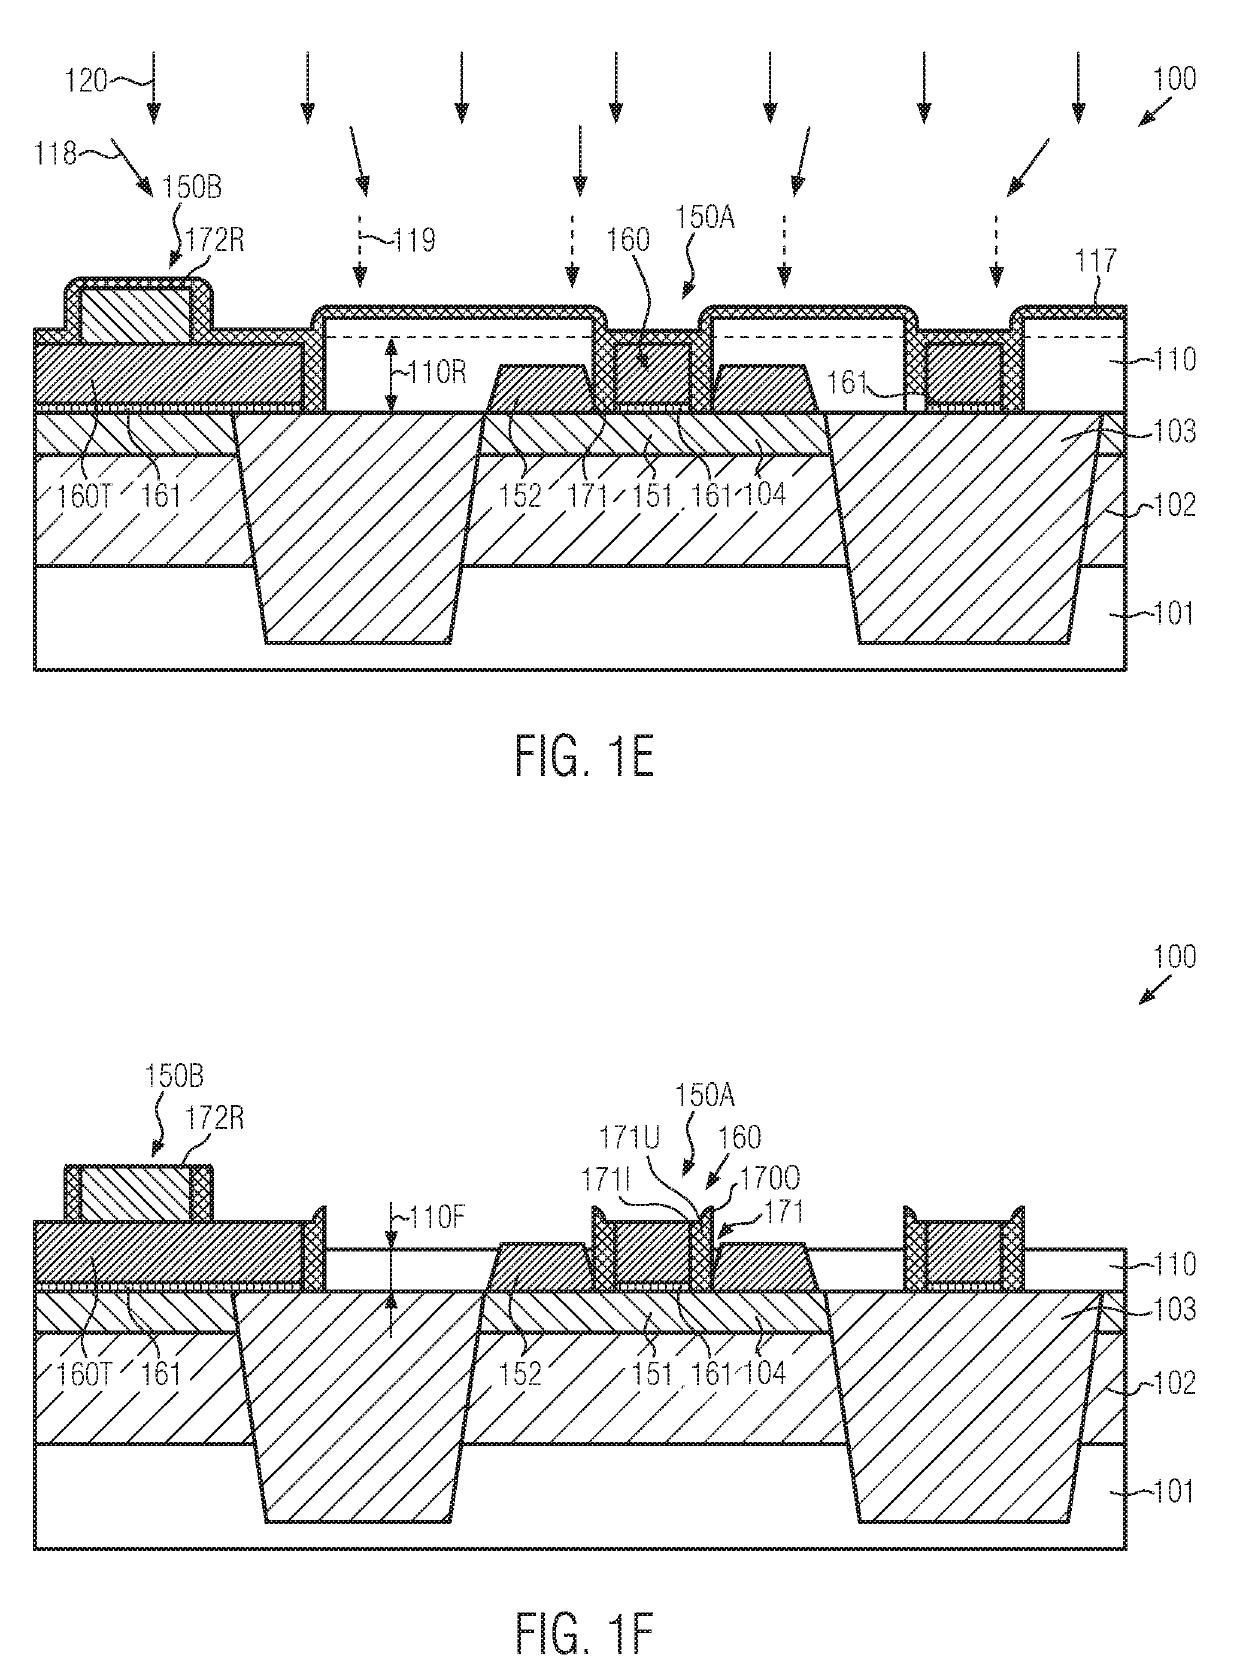 Cap removal for gate electrode structures with reduced complexity